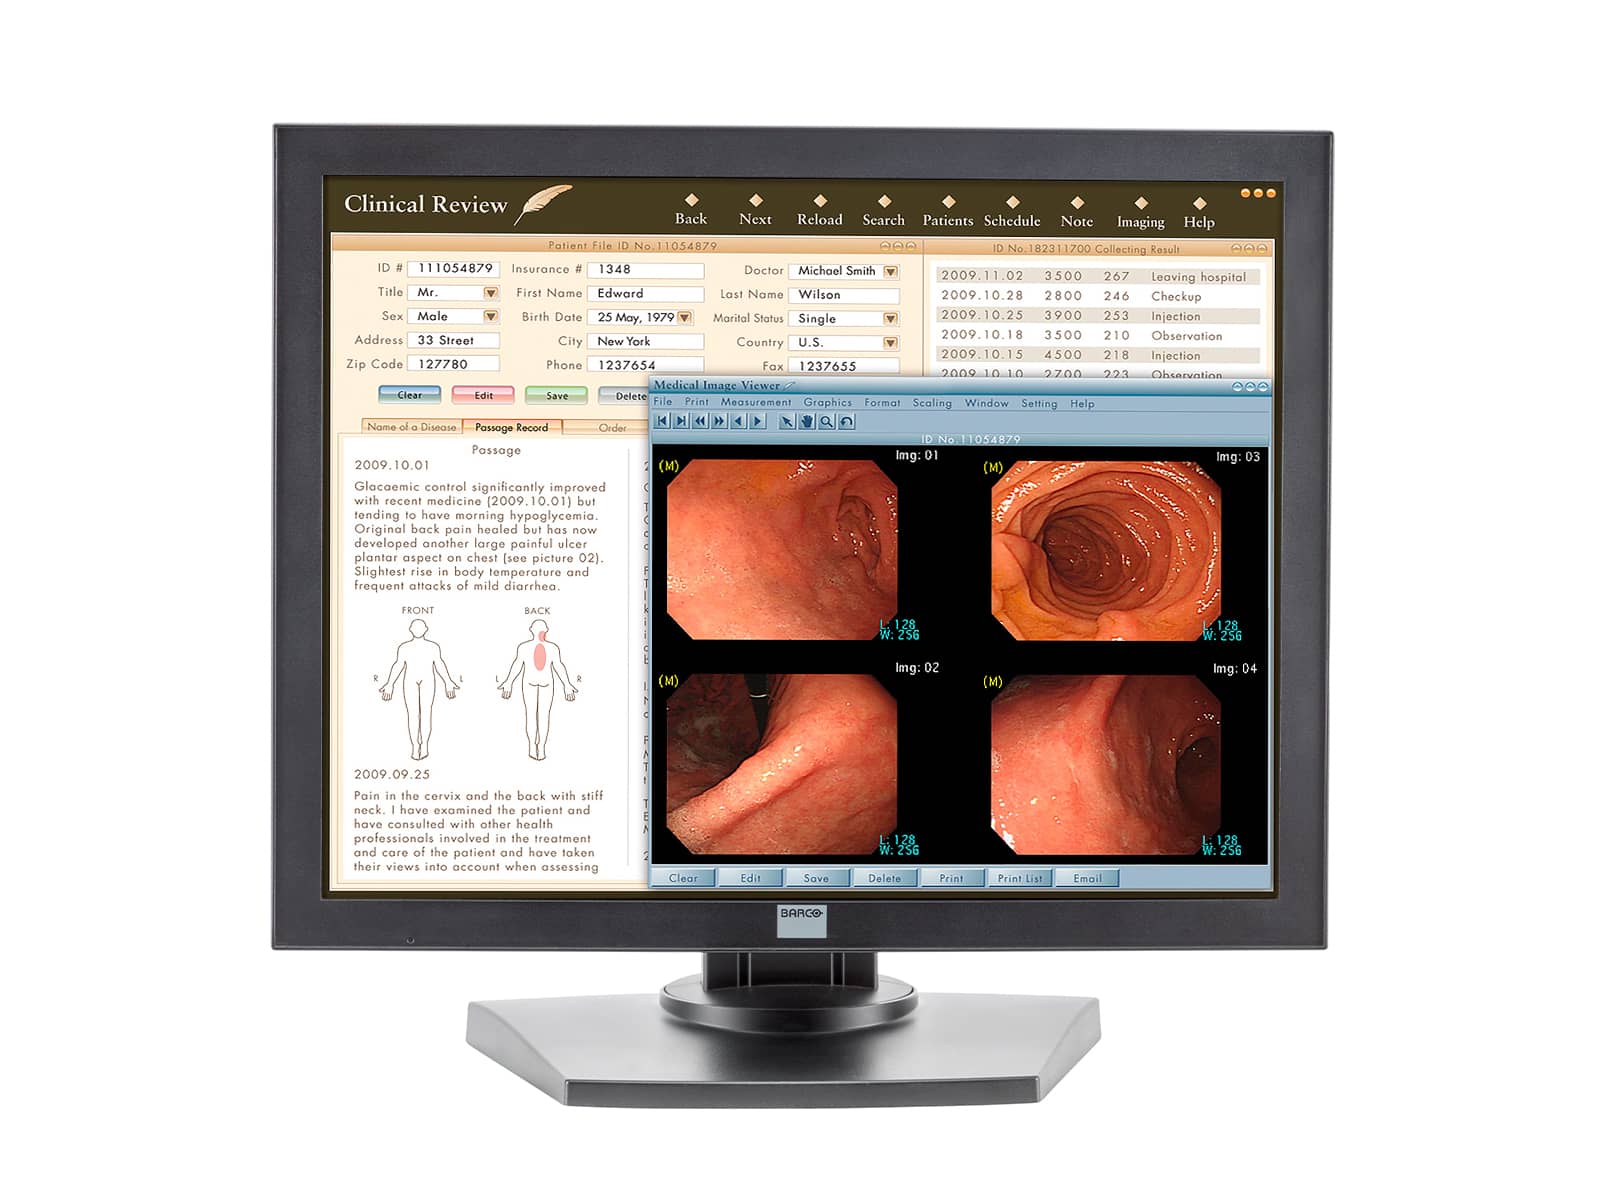 Barco MDRC-1119 1MP 19" Color Clinical Review Display Monitors.com 